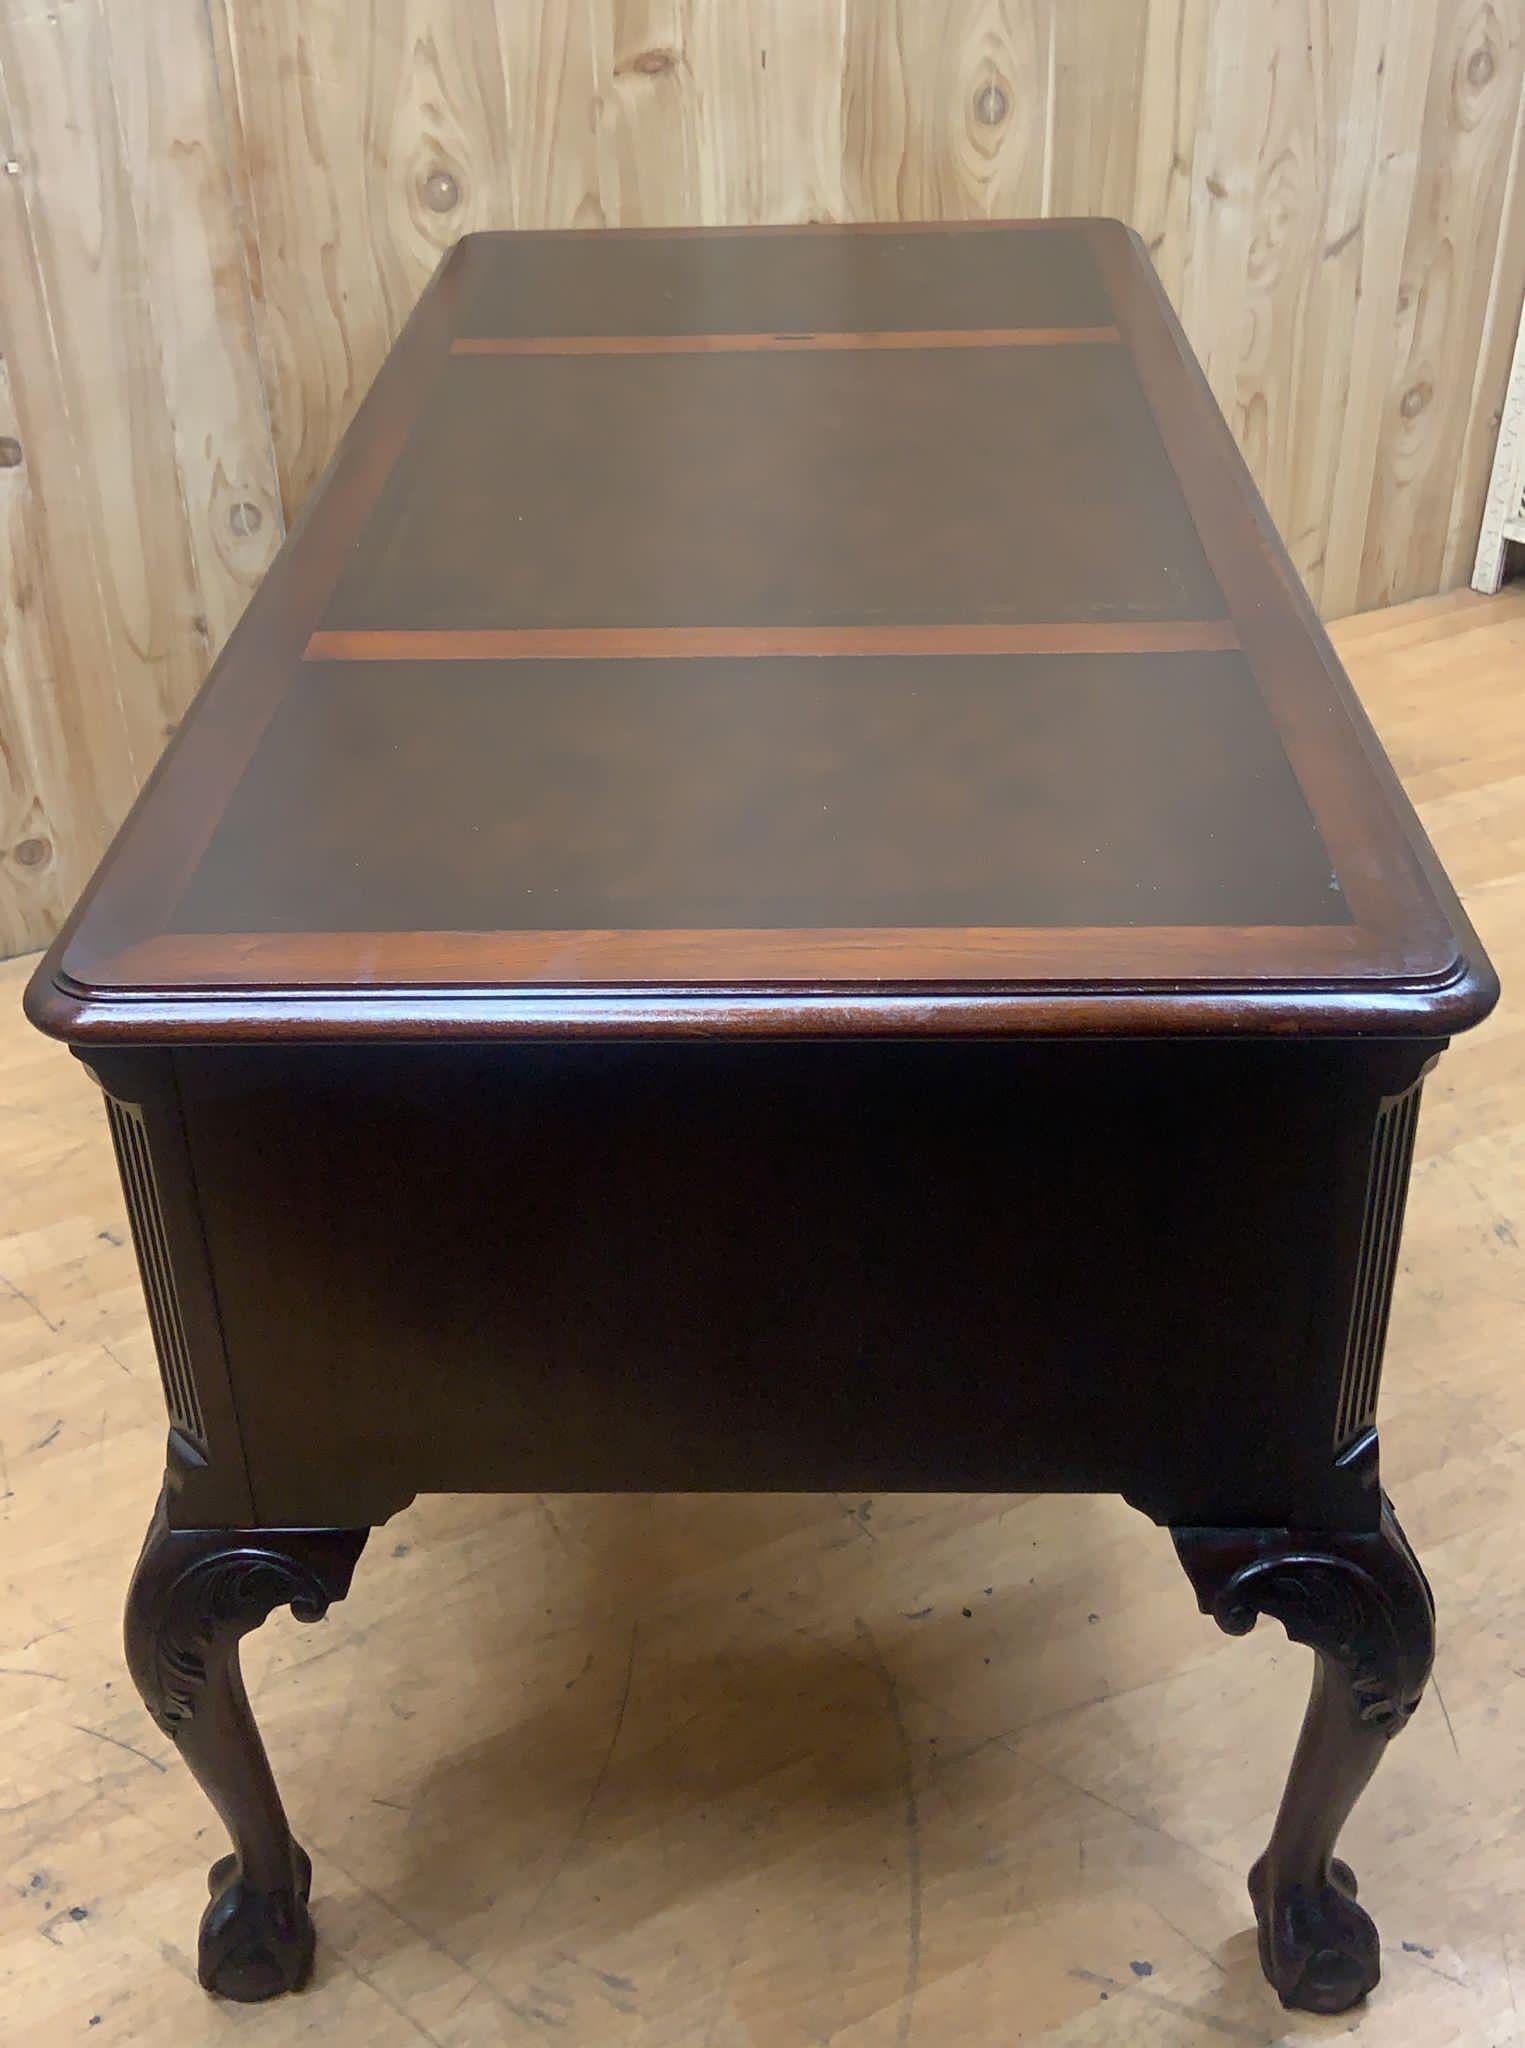 Vintage Heckman English Chippendale Tooled Leather Top Cabriole Leg Writing Desk For Sale 2